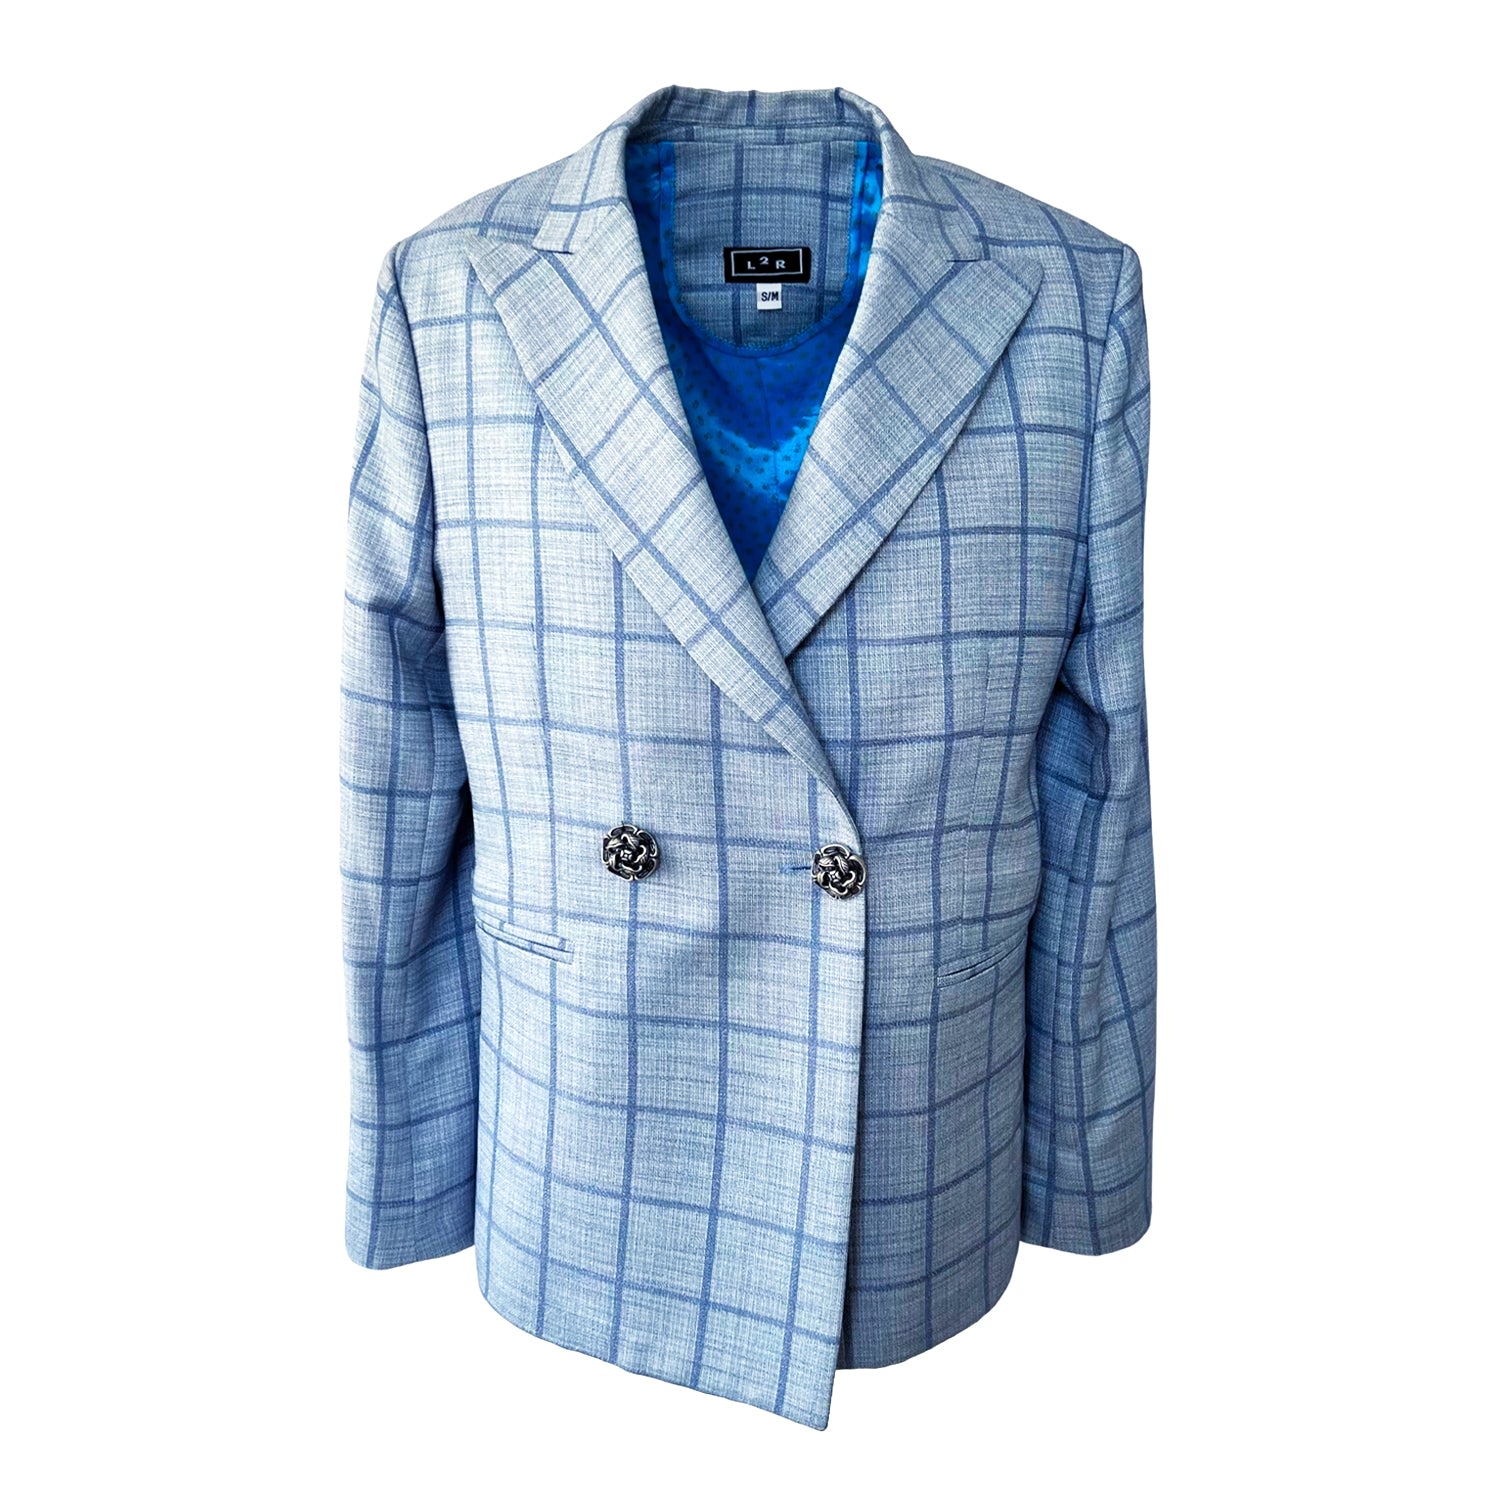 L2r The Label Women's Double-breasted Blazer In Light Blue Plaid